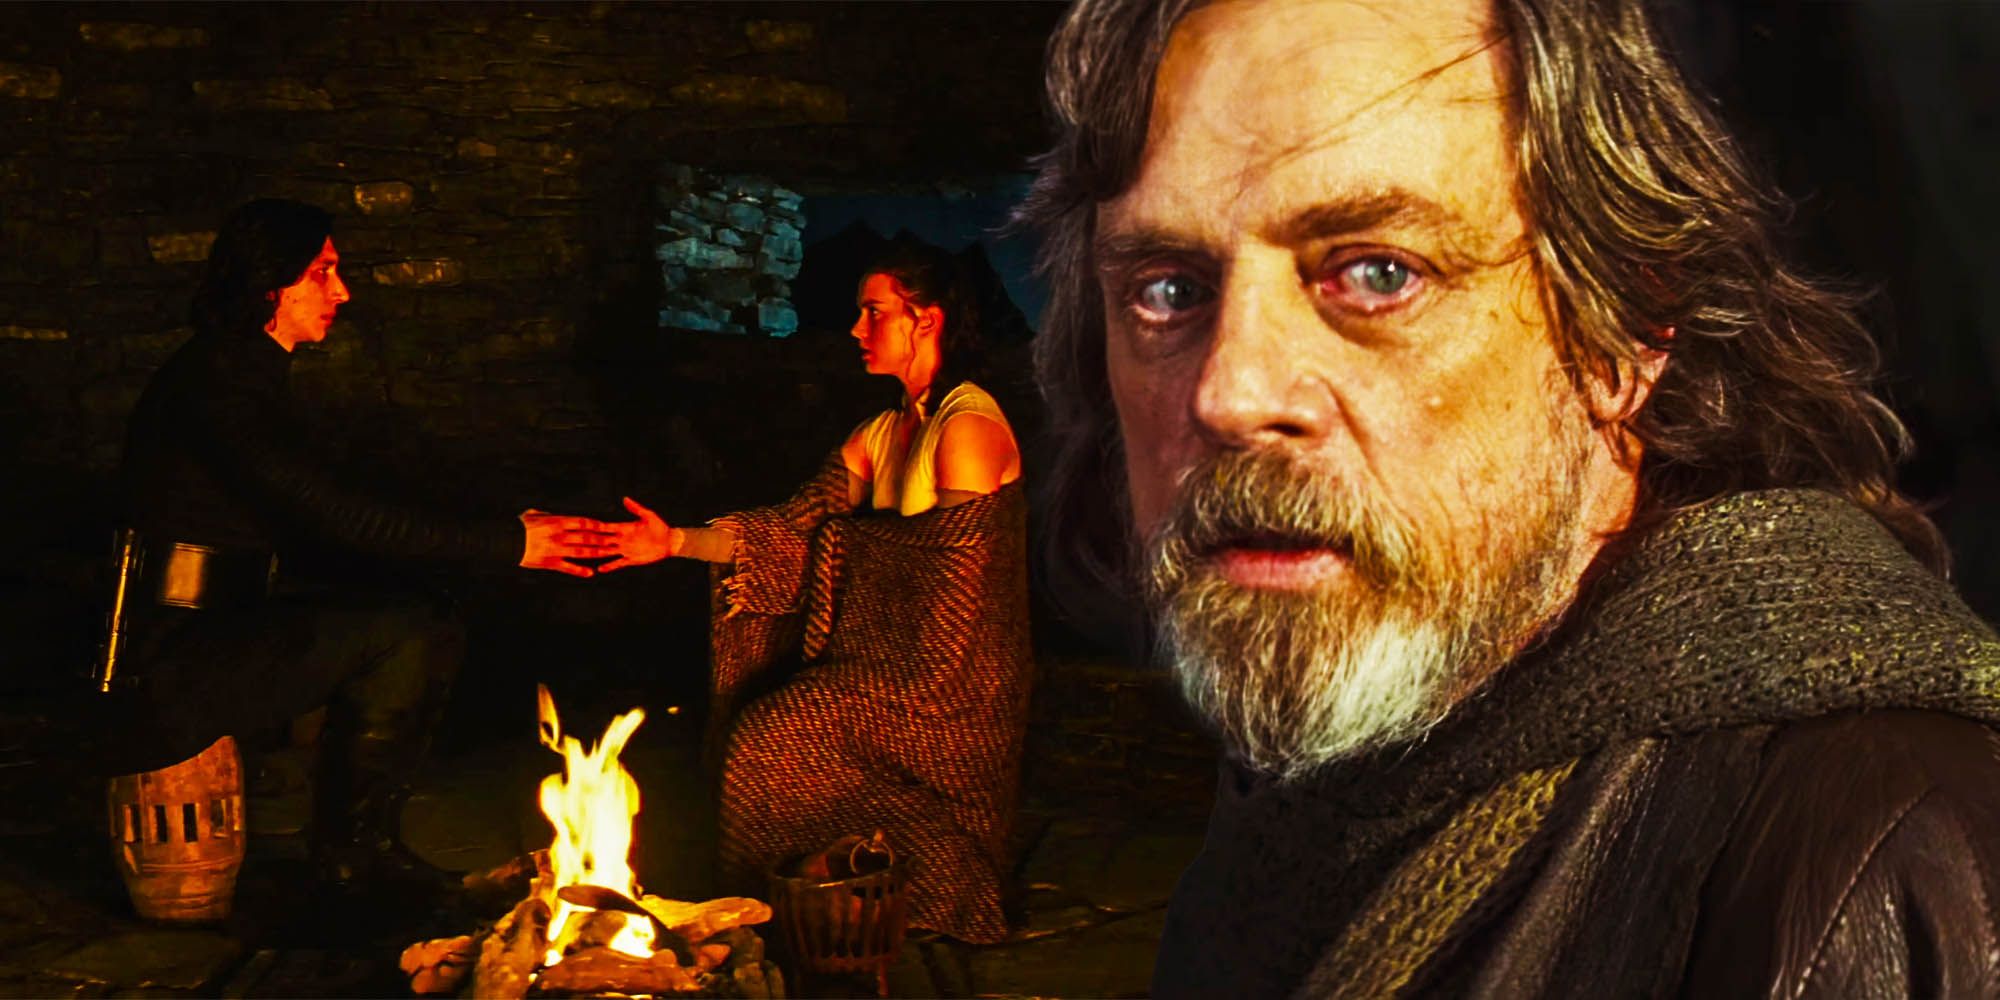 How Luke Skywalker was able to Rey and Kylo Rens force connection star wars the last jedi